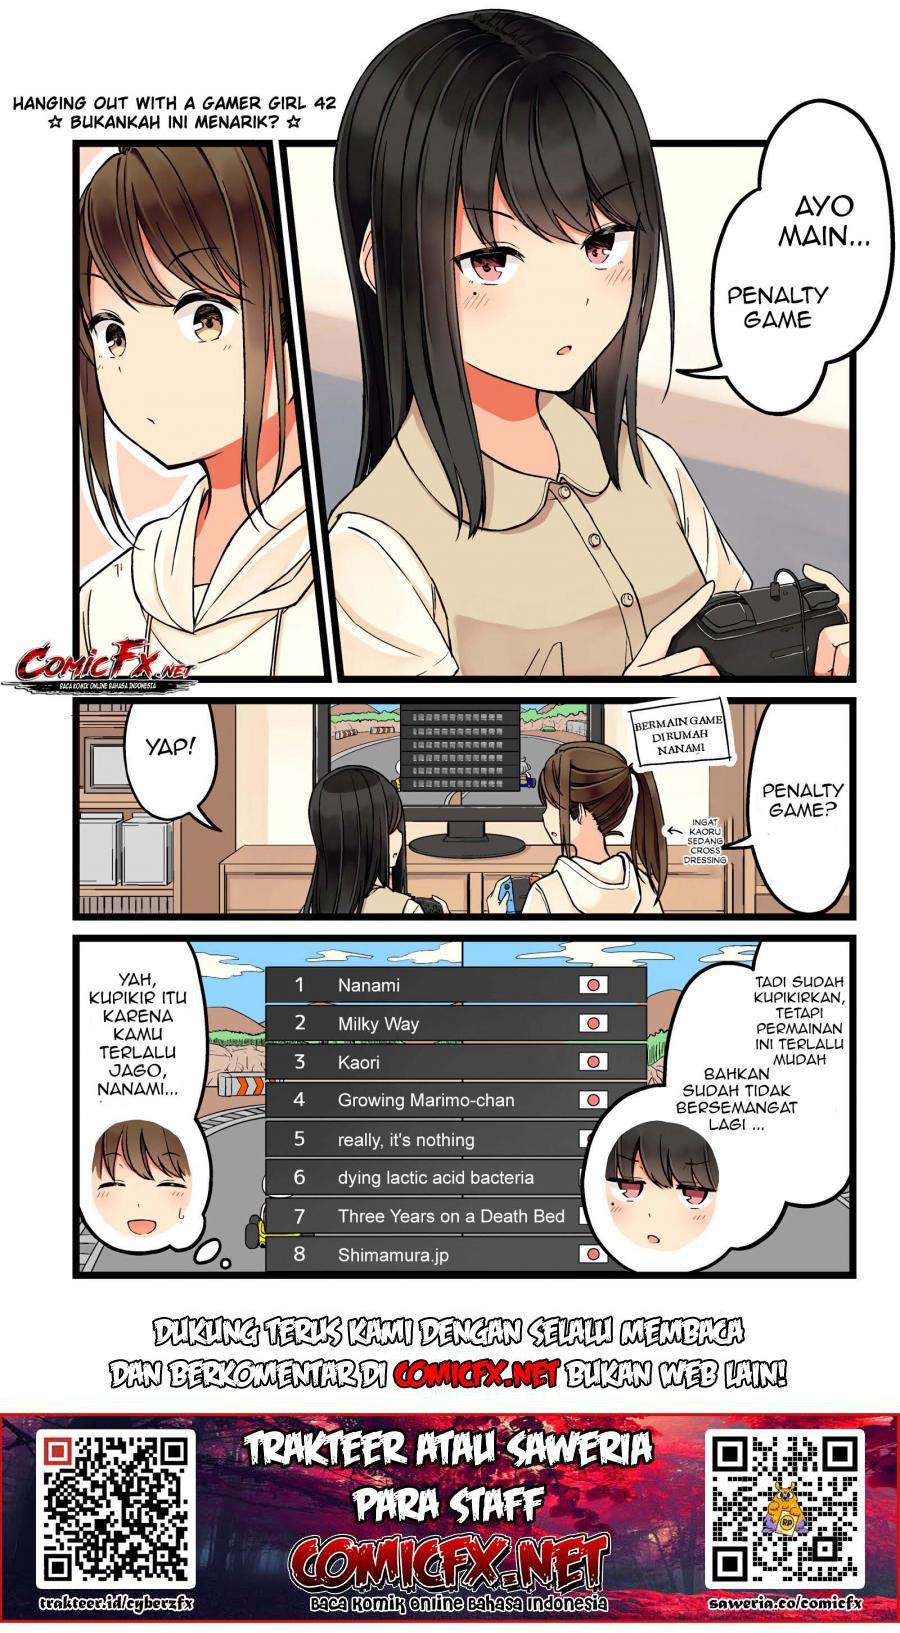 Hanging Out With A Gamer Girl Chapter 42